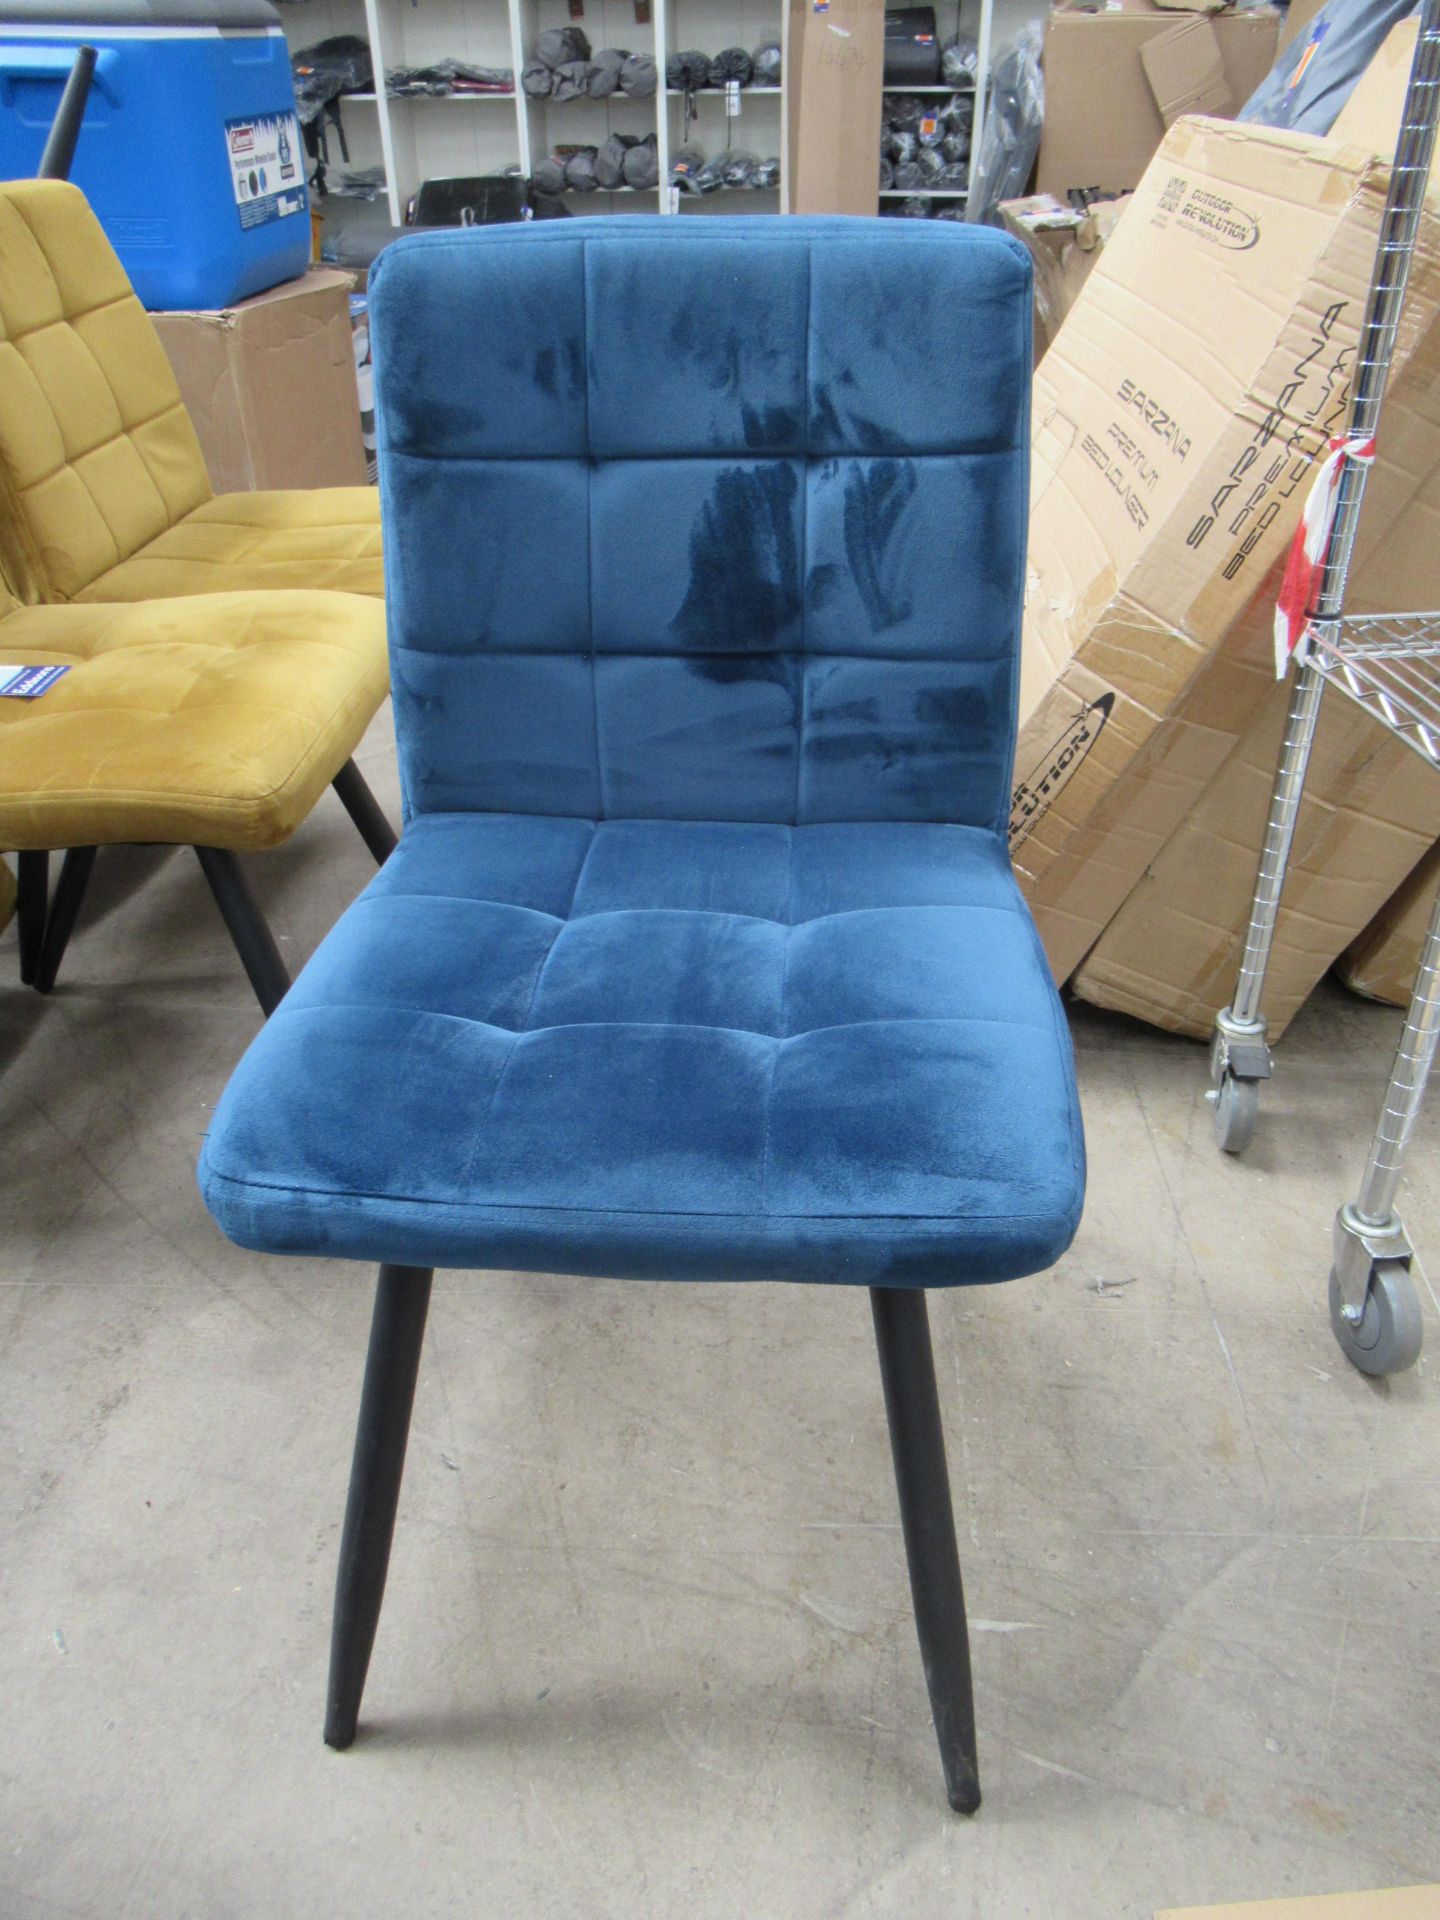 4x Blue Suede Effect Chairs - Image 2 of 2